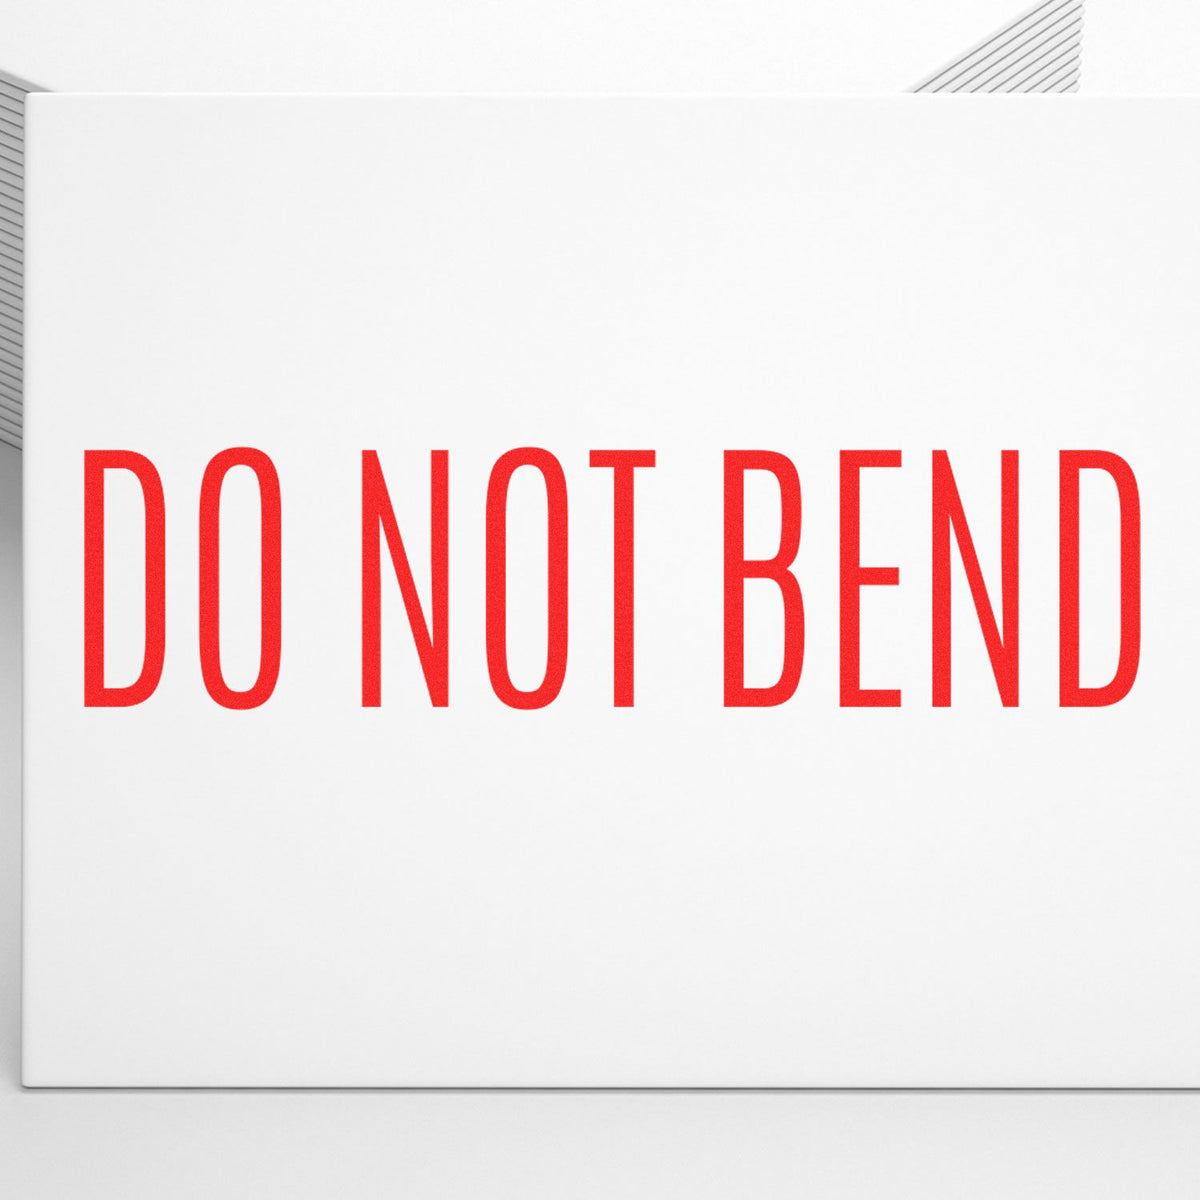 Do Not Bend Rubber Stamp In Use Photo